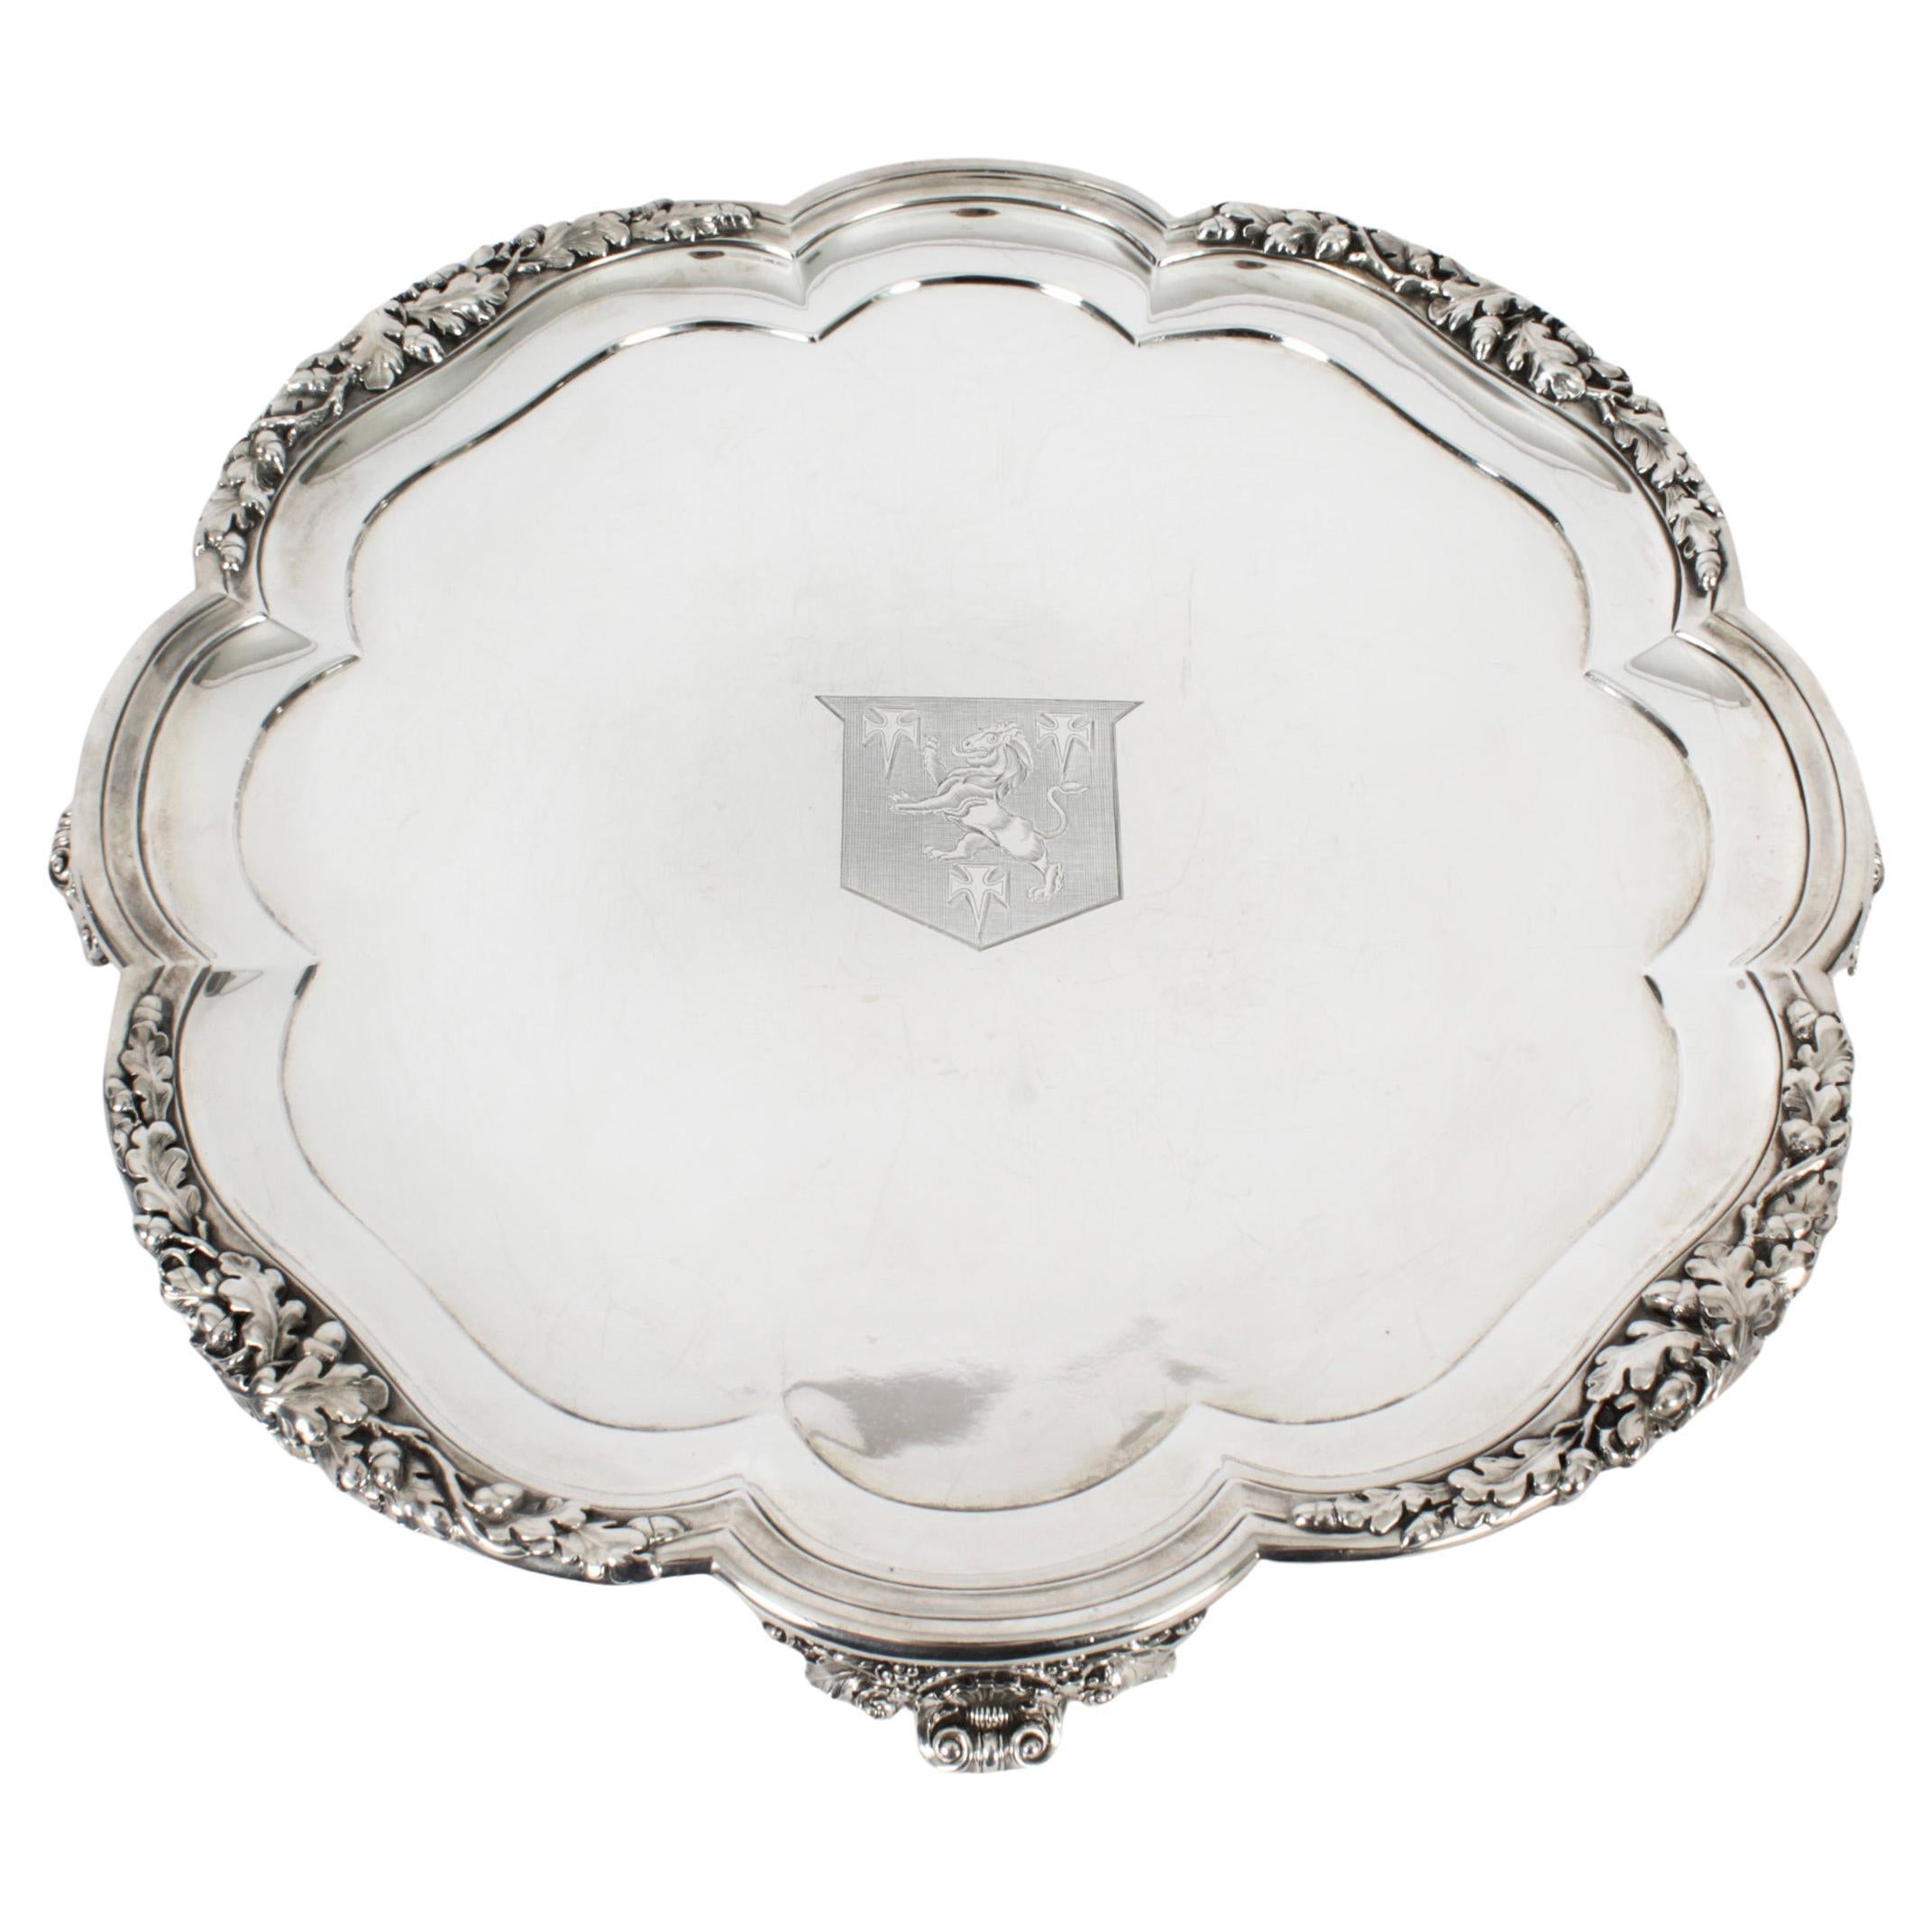 Antique Large William IV Silver Tray Salver by Paul Storr 1837 19th Century For Sale